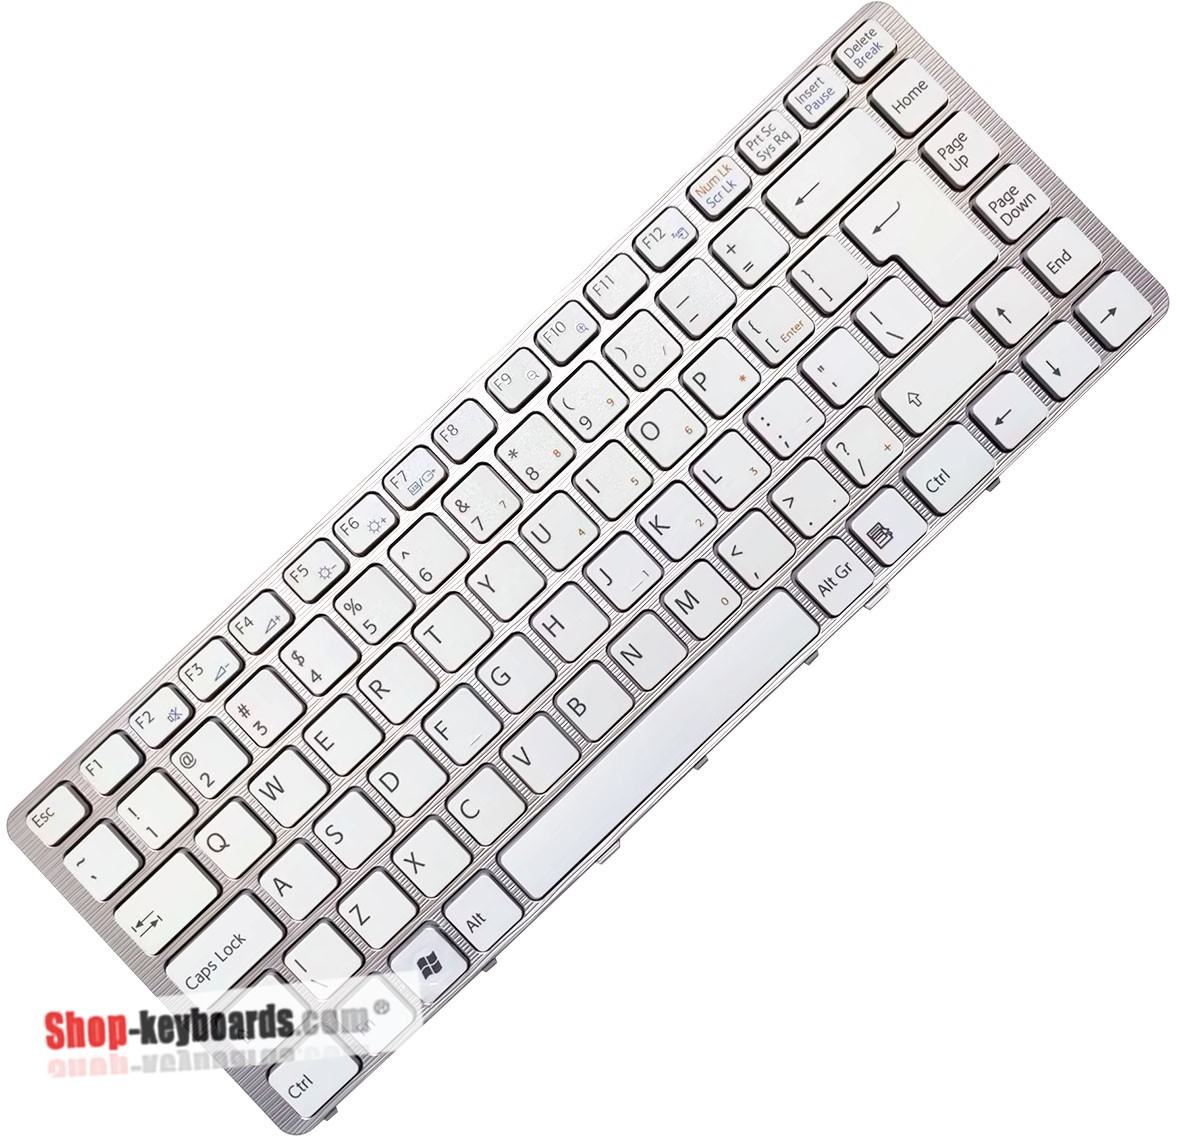 Sony Vaio VGN-NW240F/W Keyboard replacement